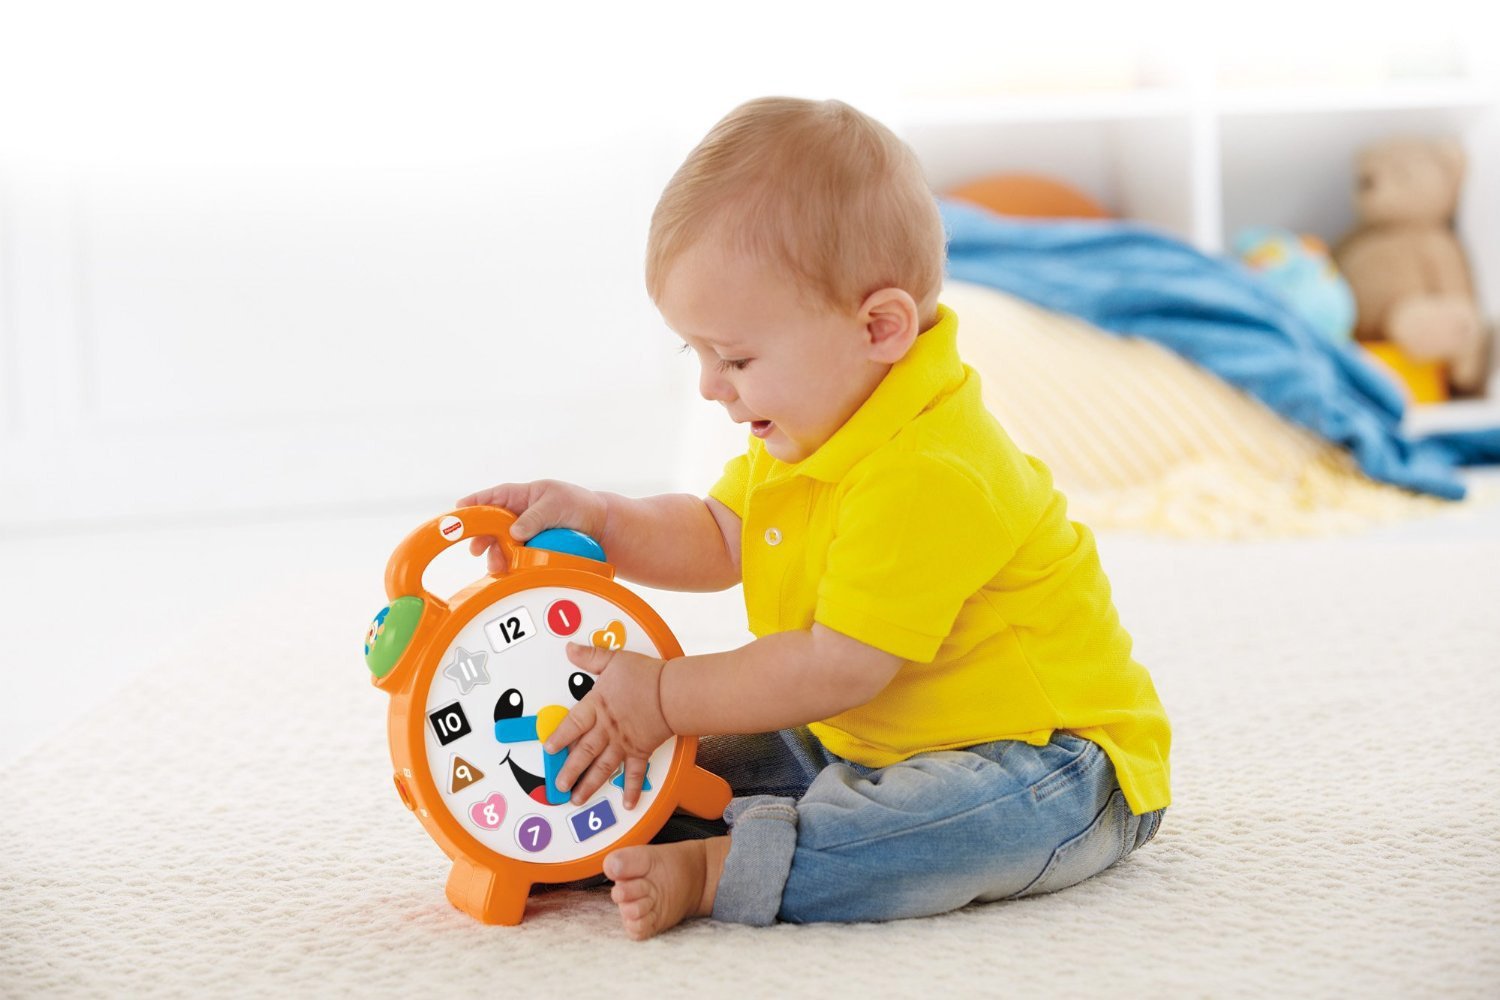 Fisher-Price Laugh & Learn Counting Colors Clock Only $8.90!